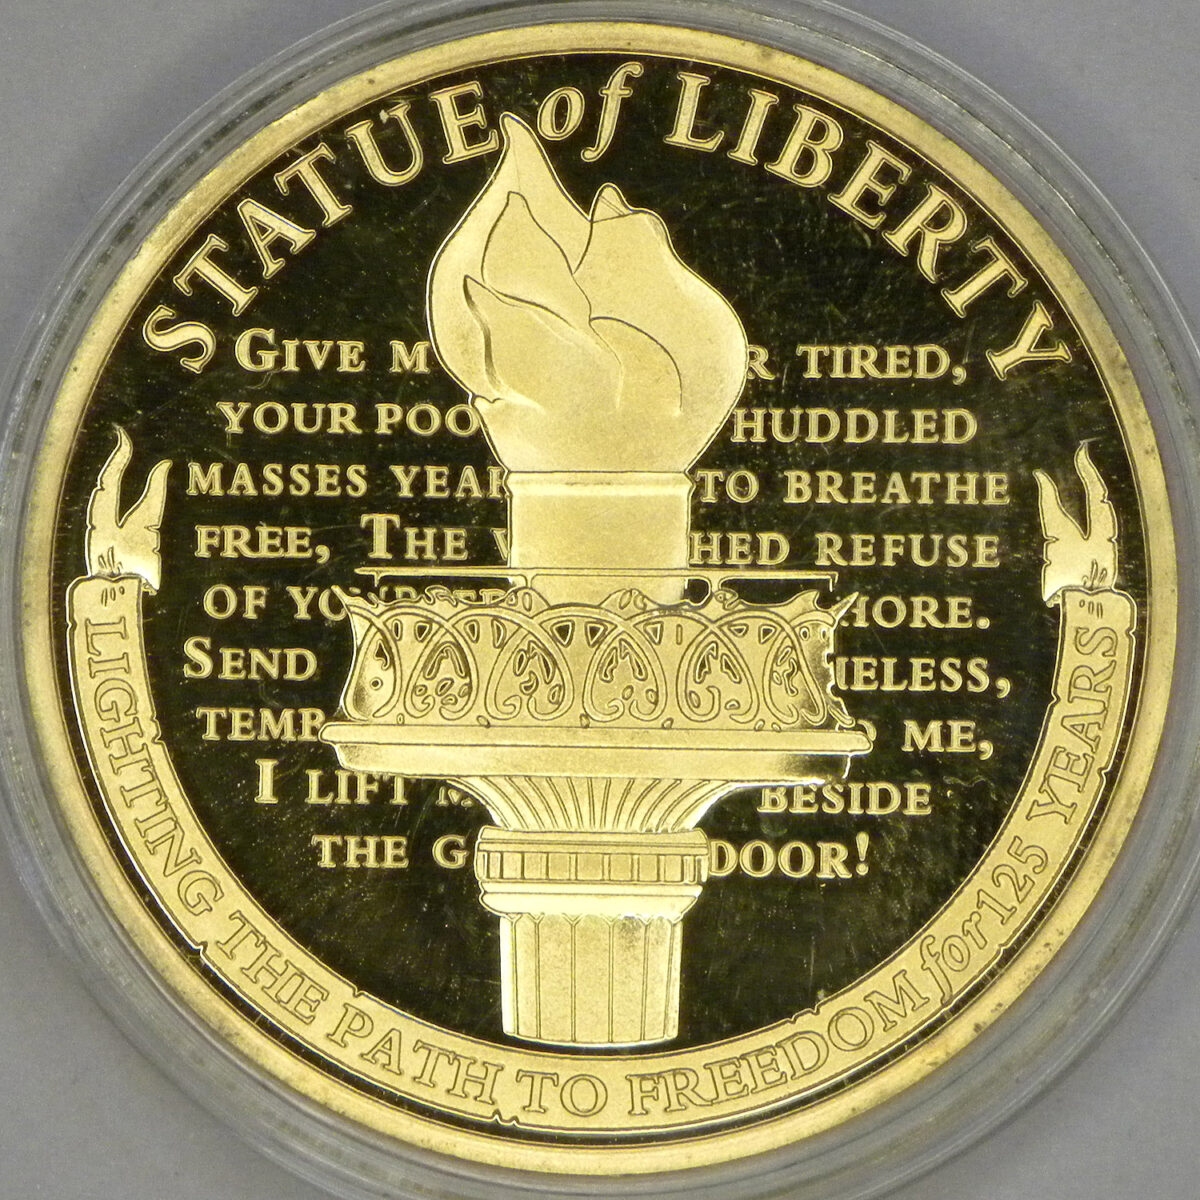 Statue of Liberty 125th Anniversary medal (reverse)